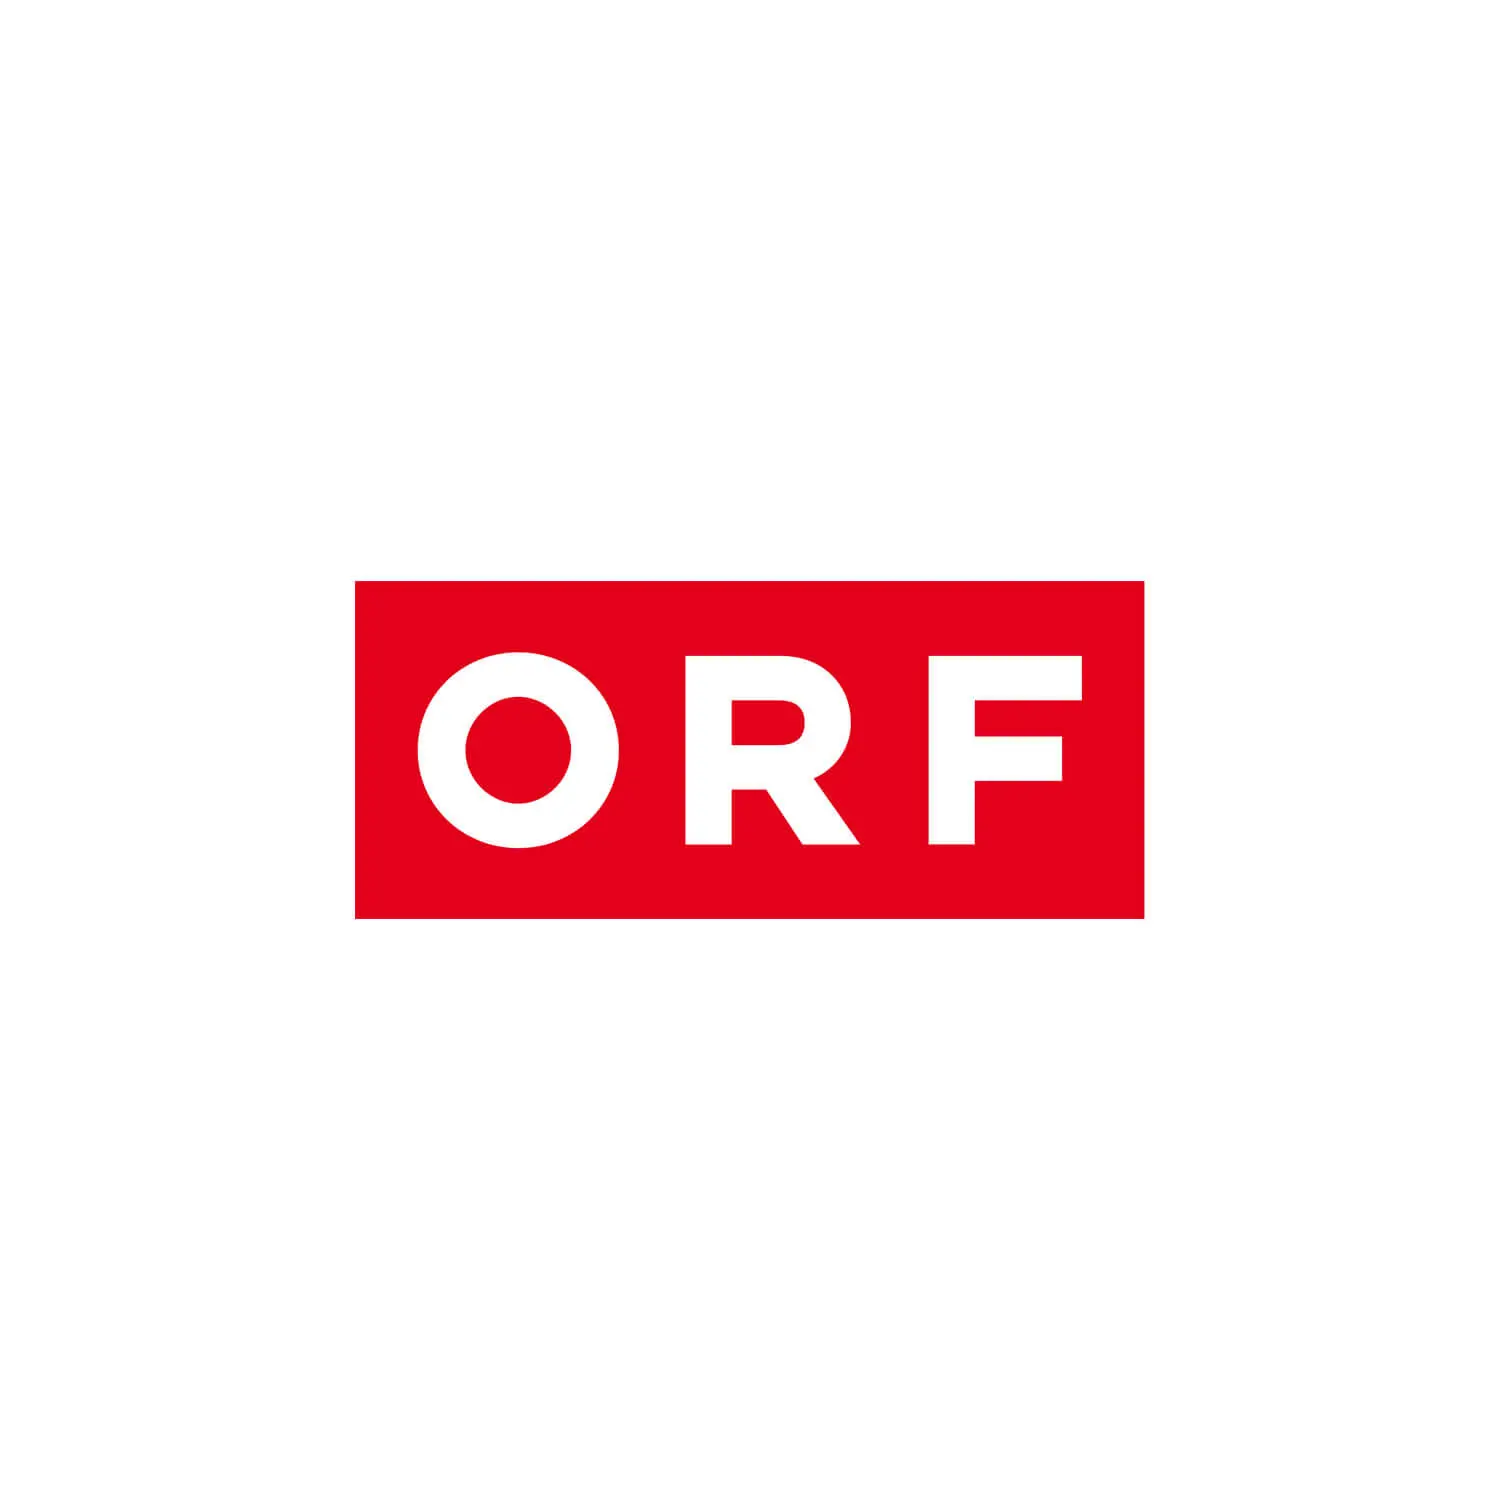 Logo of ORF